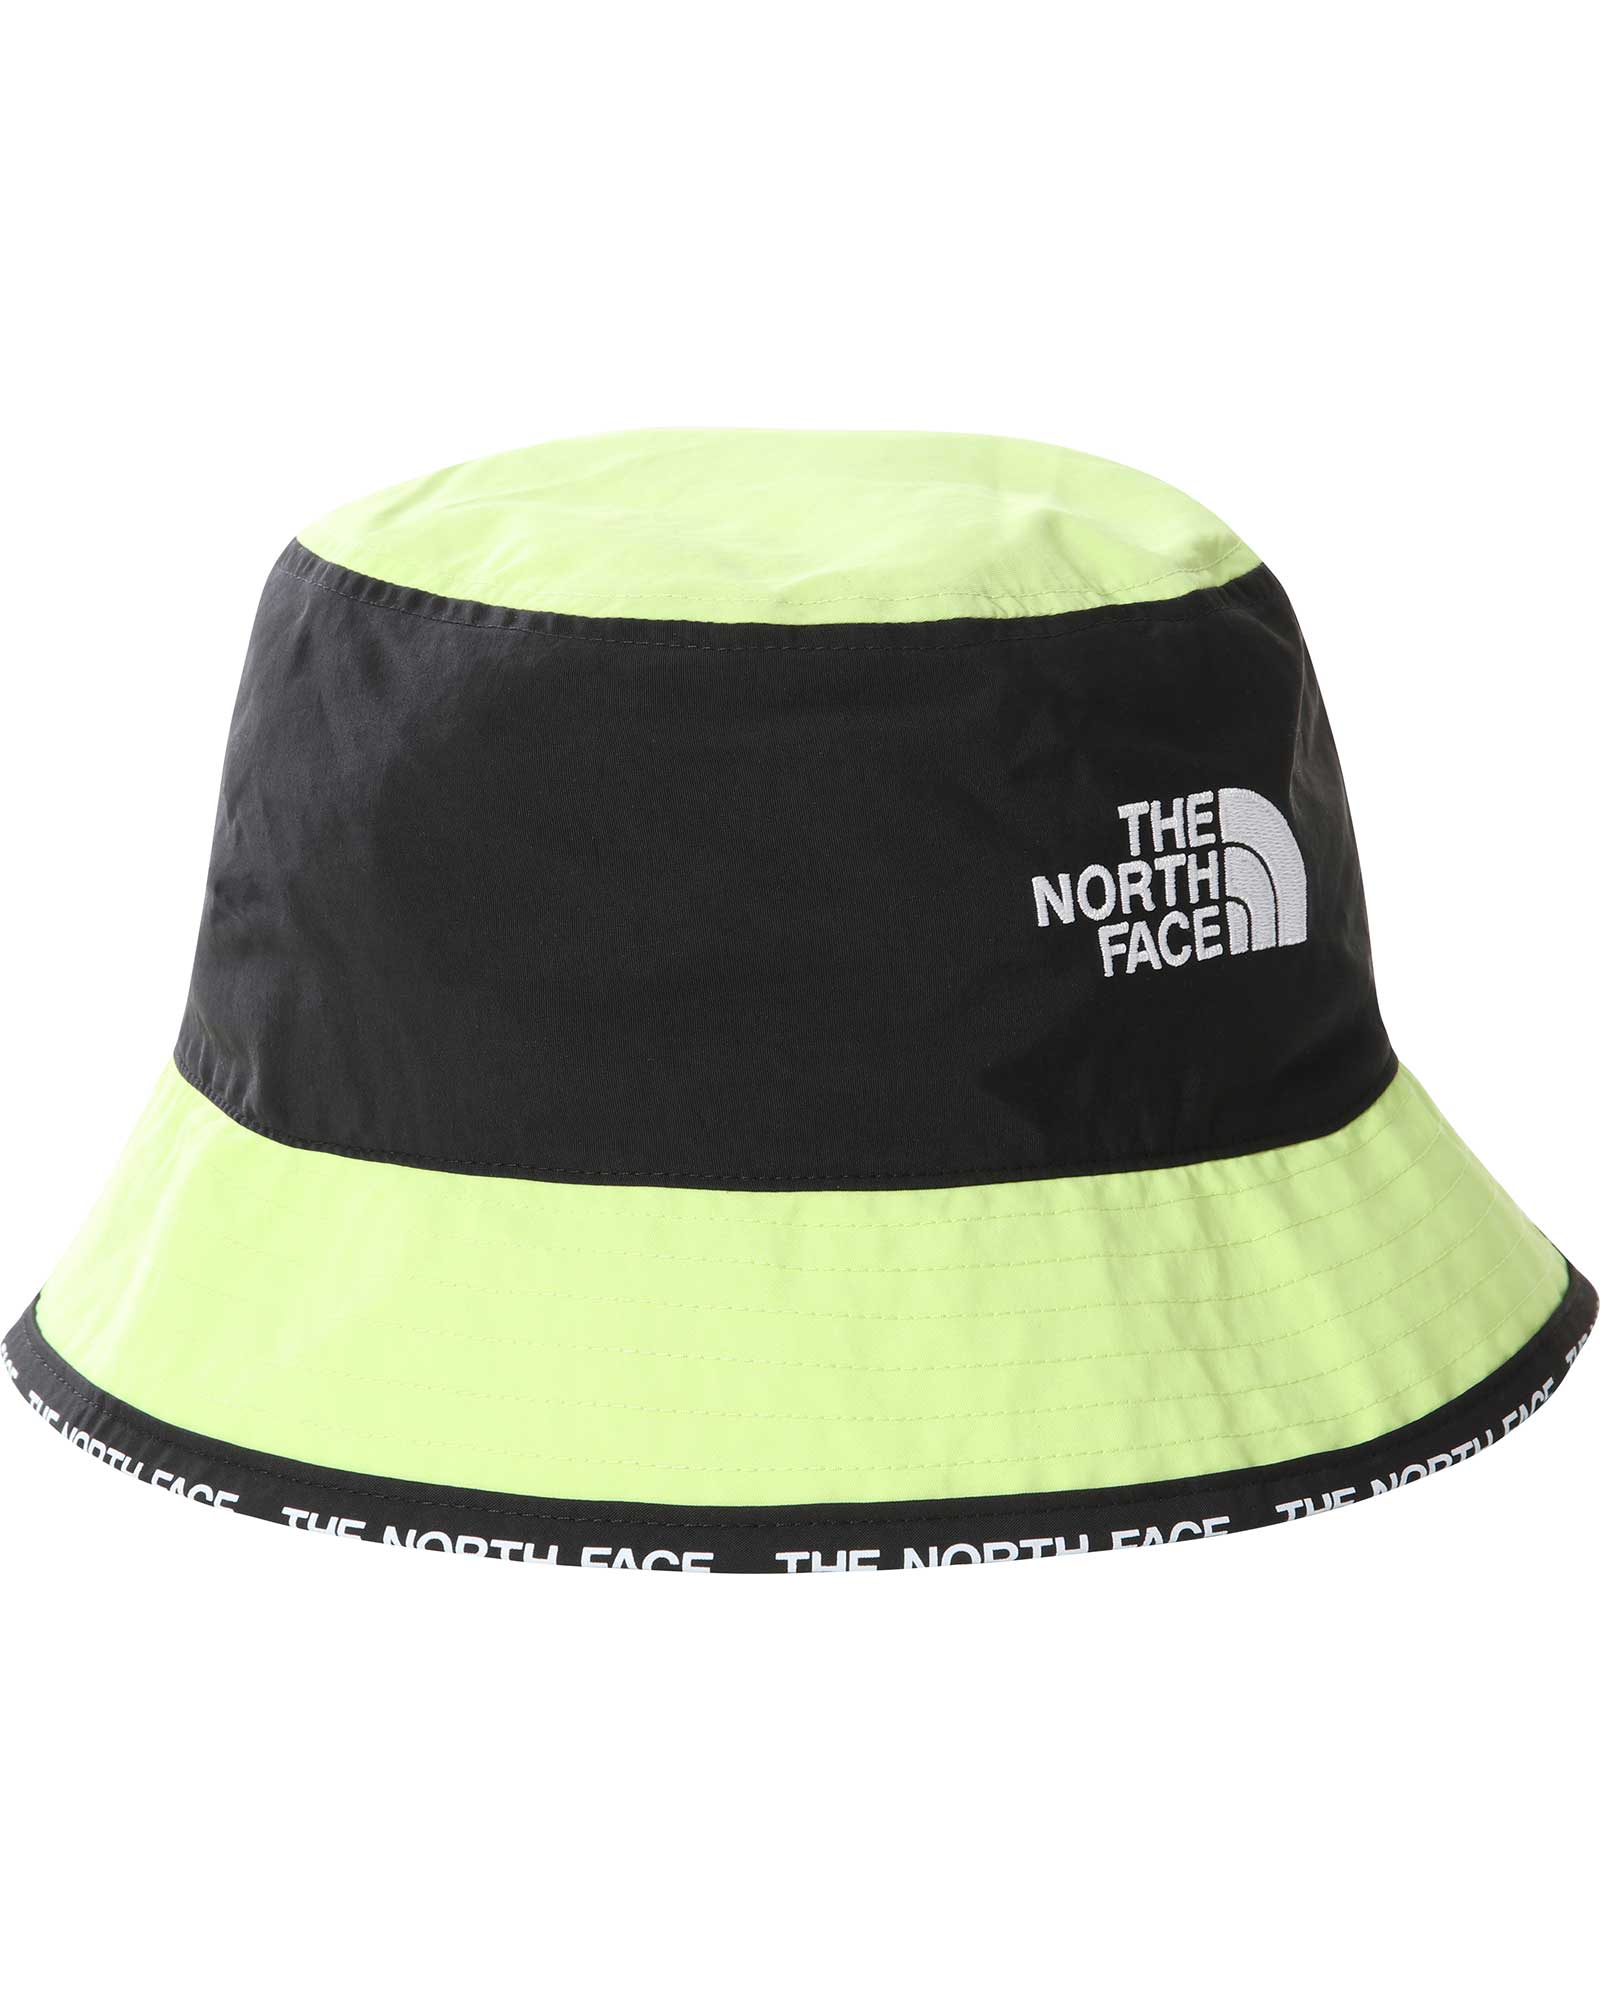 The North Face Cypress Bucket Hat - Sharp Green S/M